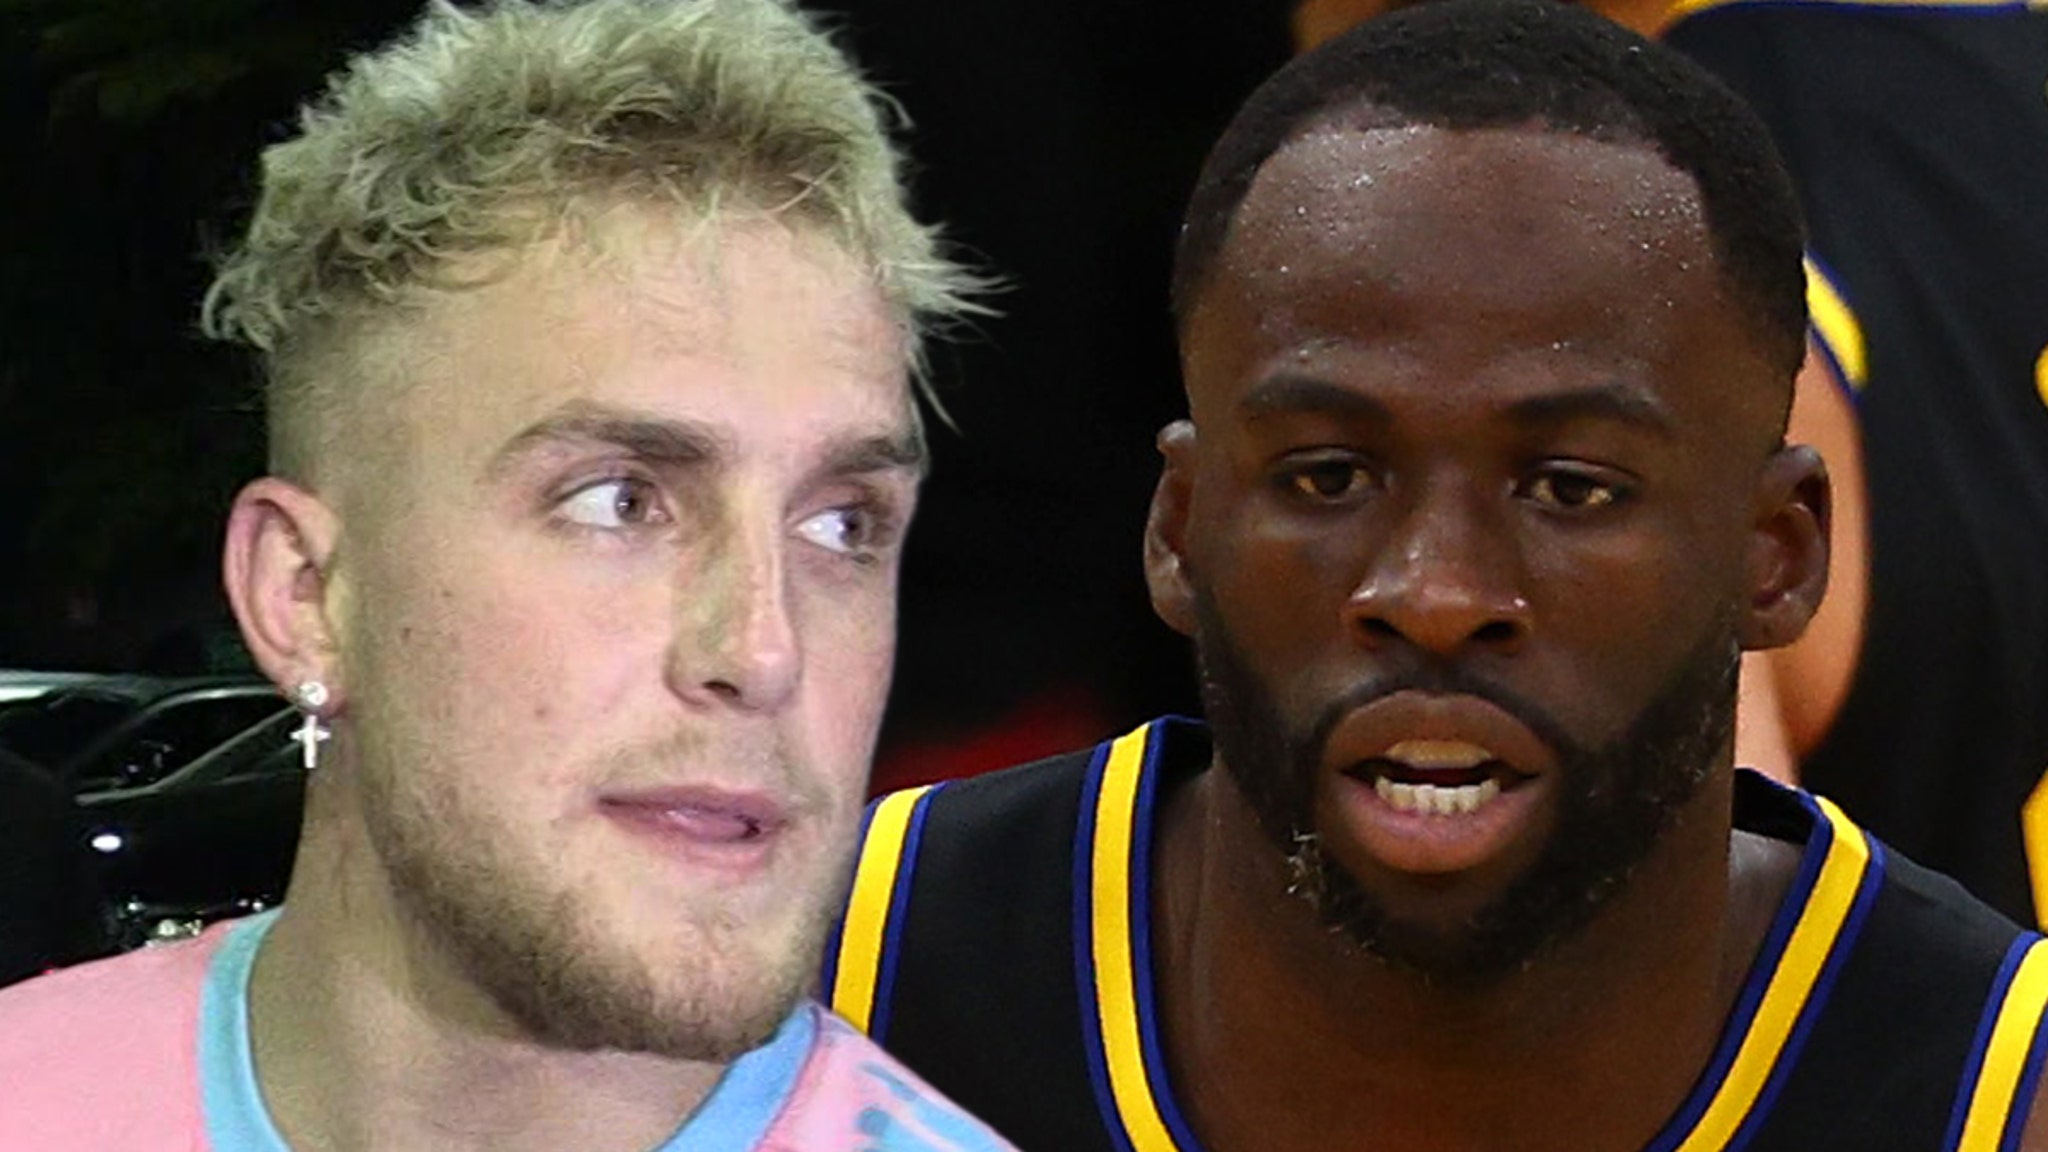 Jake Paul offers Draymond Green $10 million to box after Punch Video practice